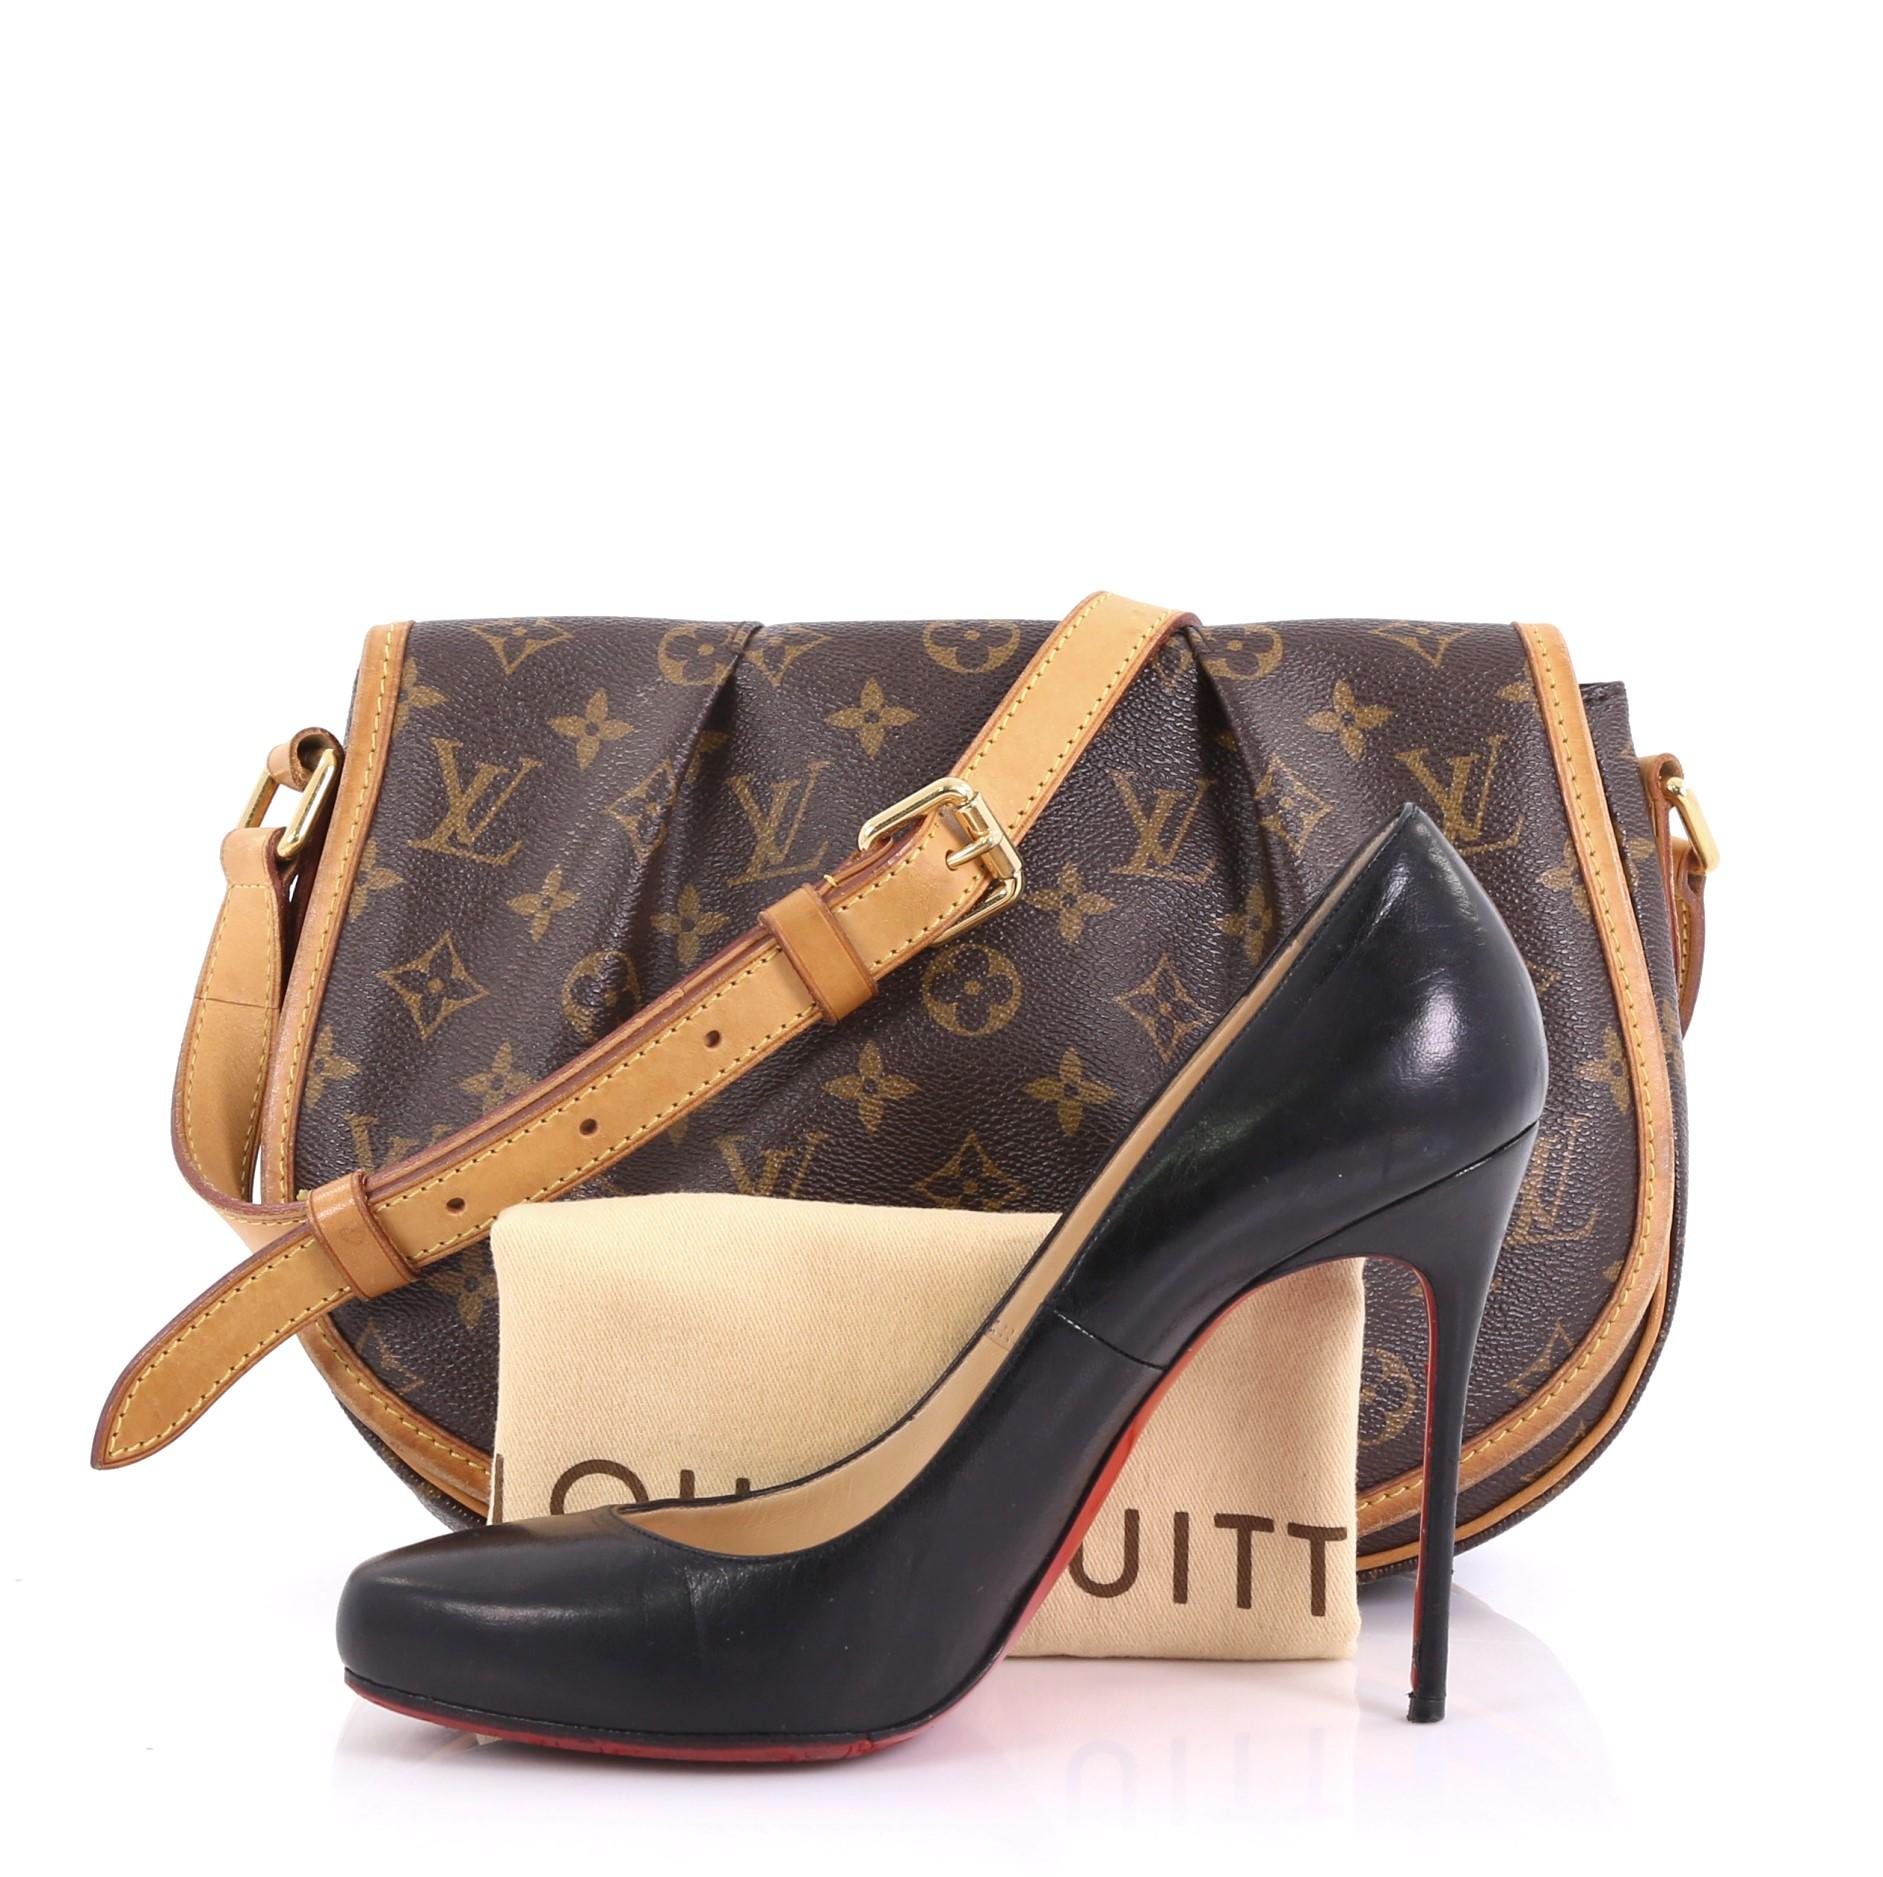 This Louis Vuitton Menilmontant Handbag Monogram Canvas PM, crafted in brown monogram coated canvas, features a full frontal flap with pleated design, flat leather adjustable shoulder strap, and gold-tone hardware. Its hidden magnetic snap closure